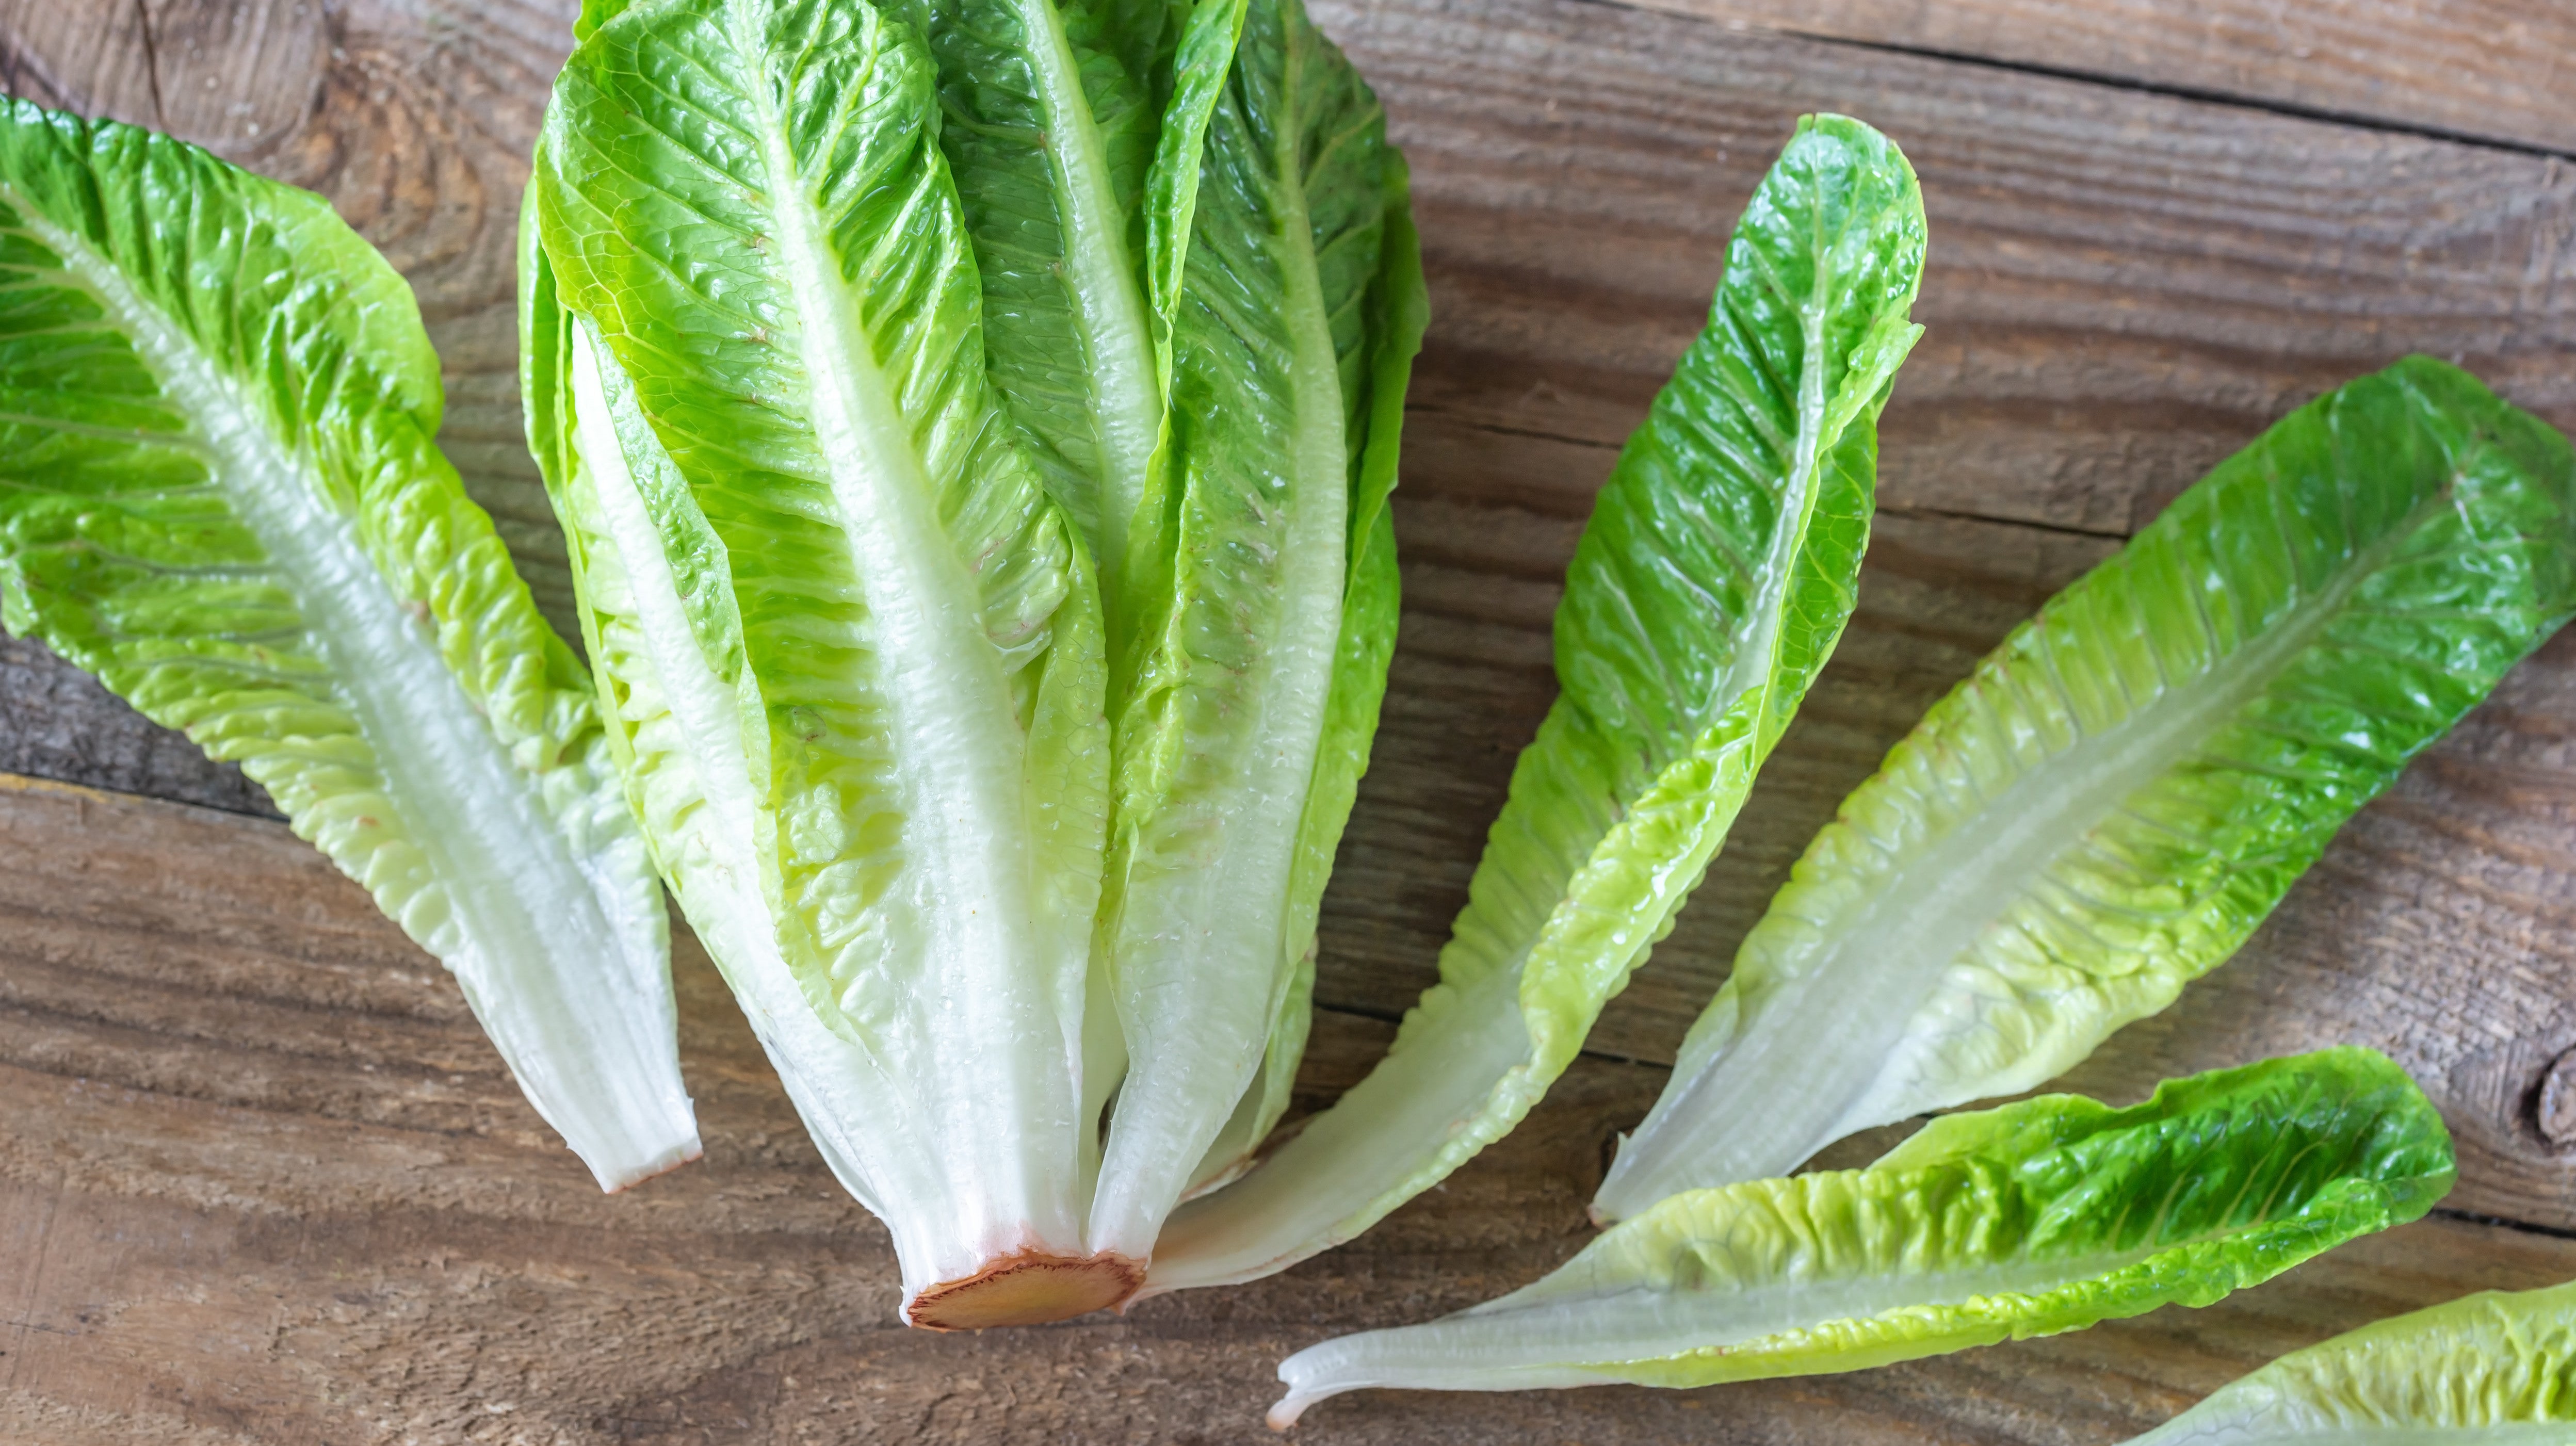 It’s Safe To Eat Lettuce Again, If You Must